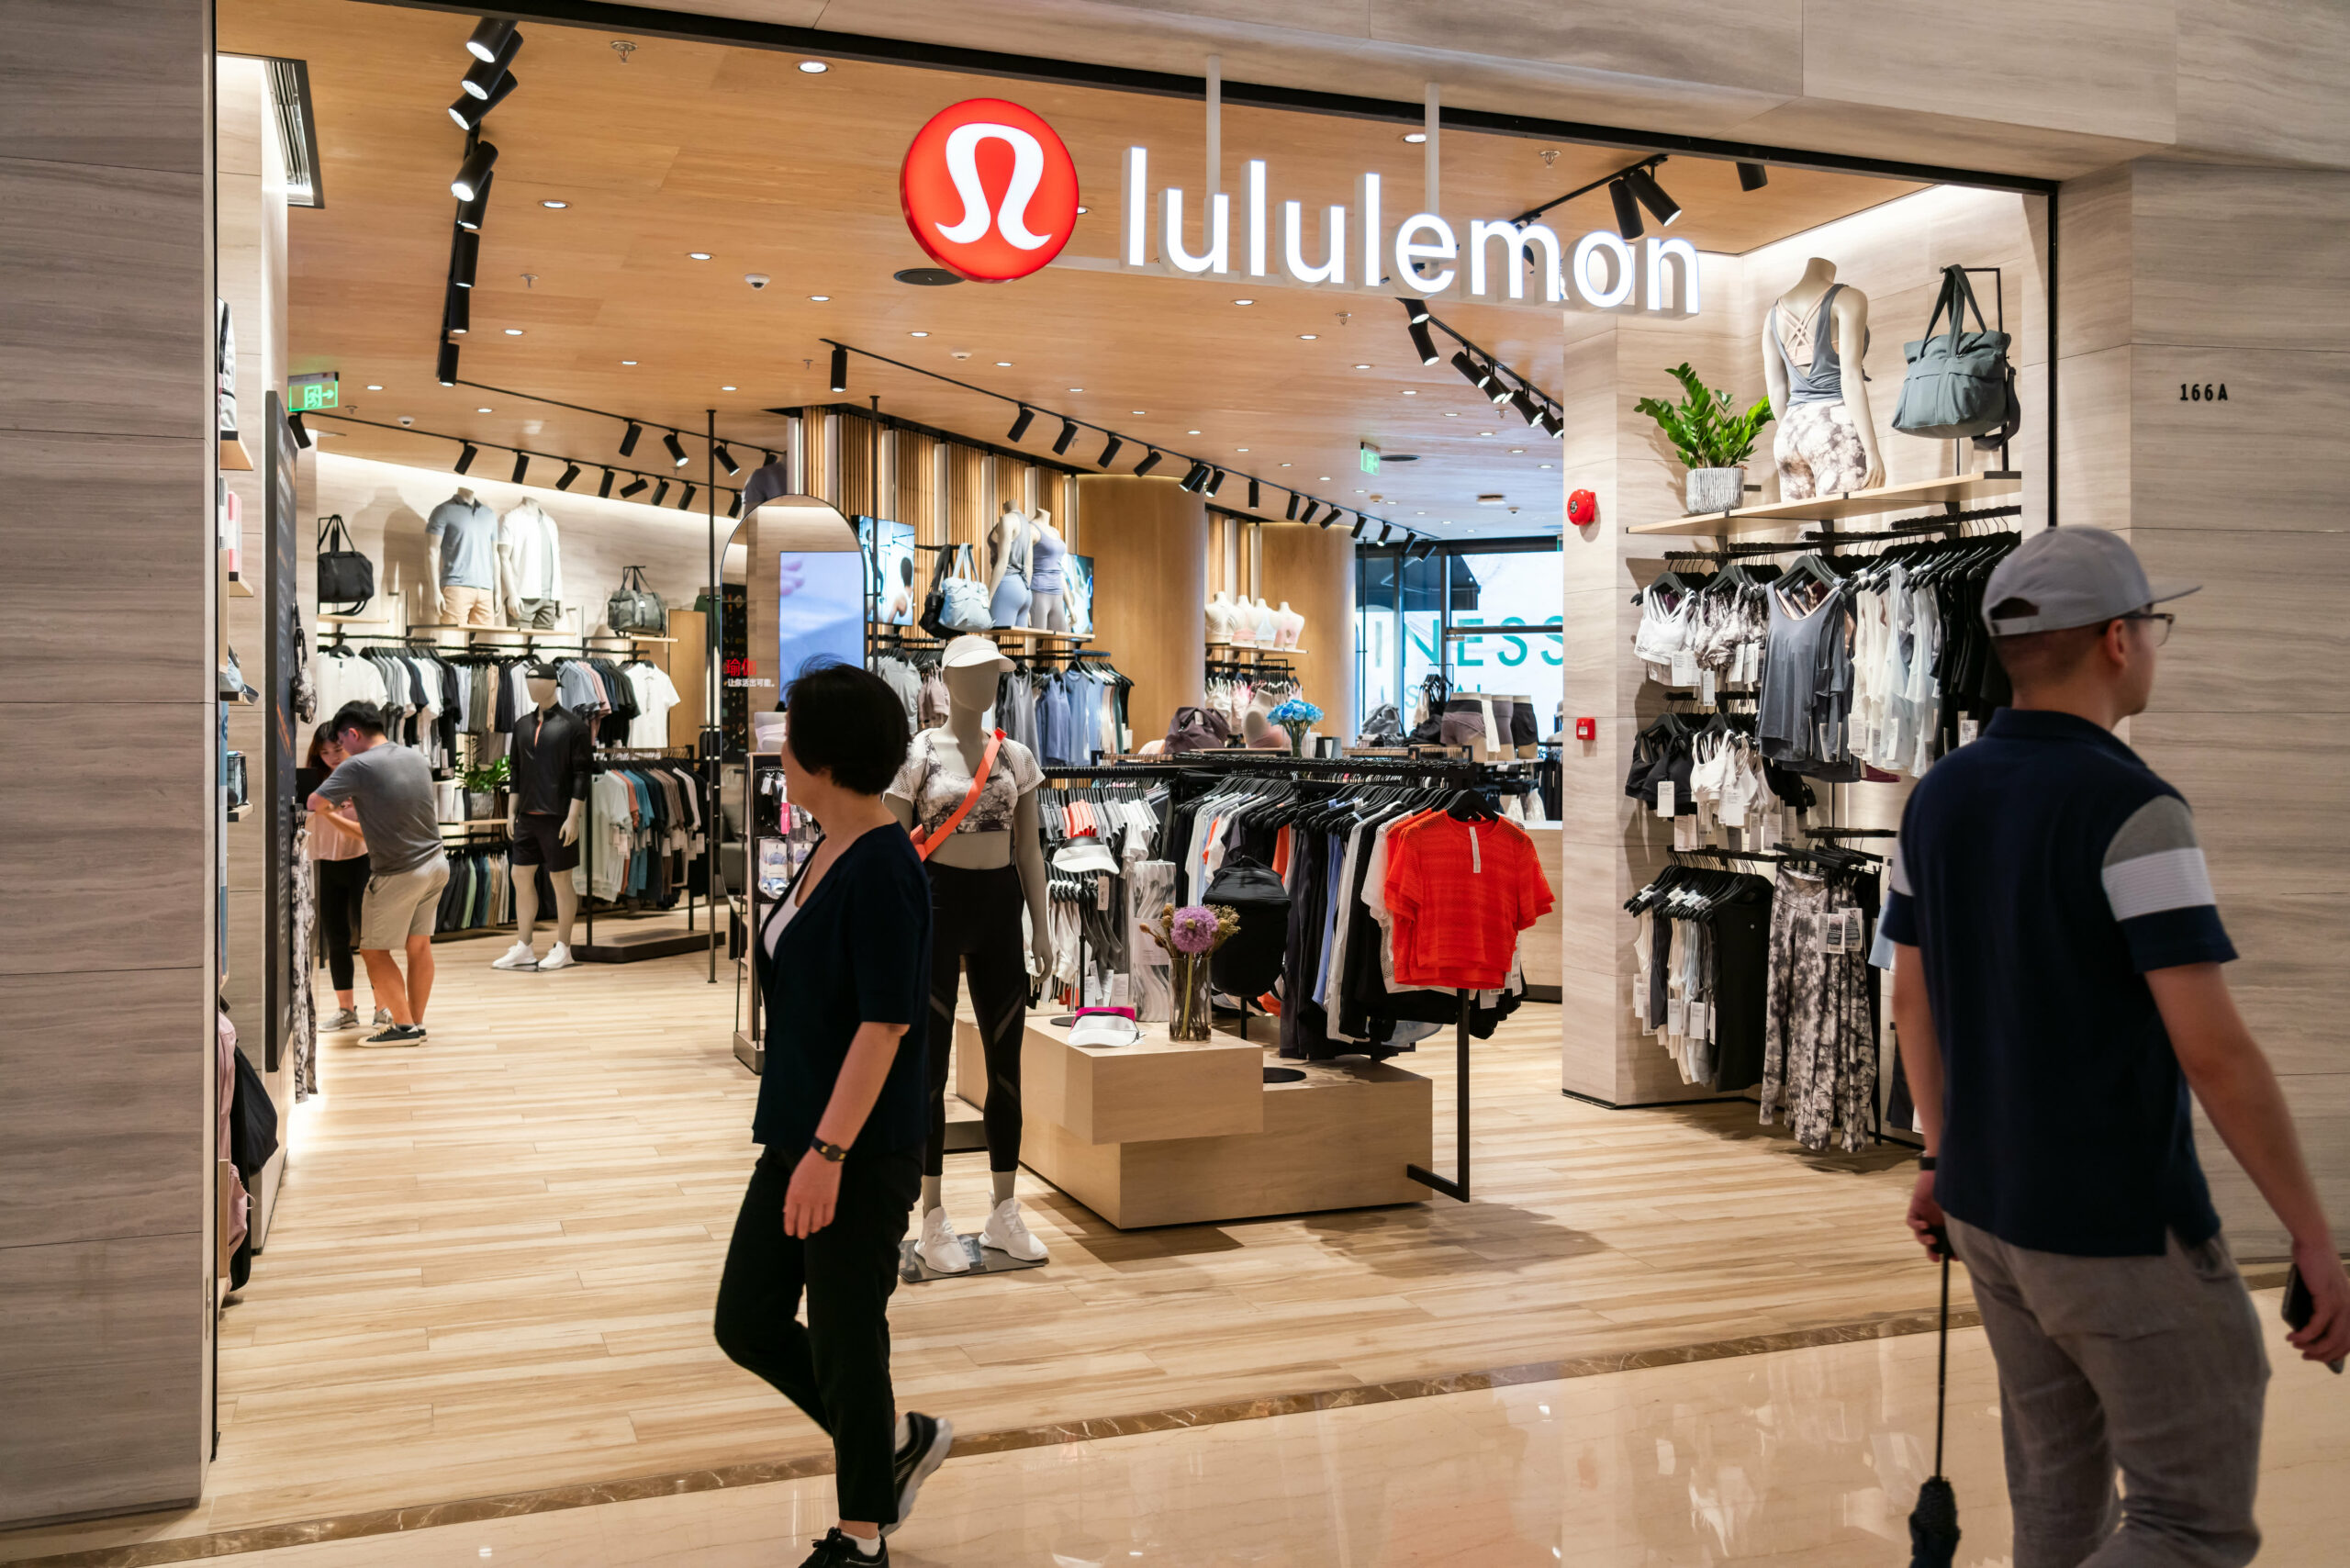 Lululemon shares hit all-time high after earnings report